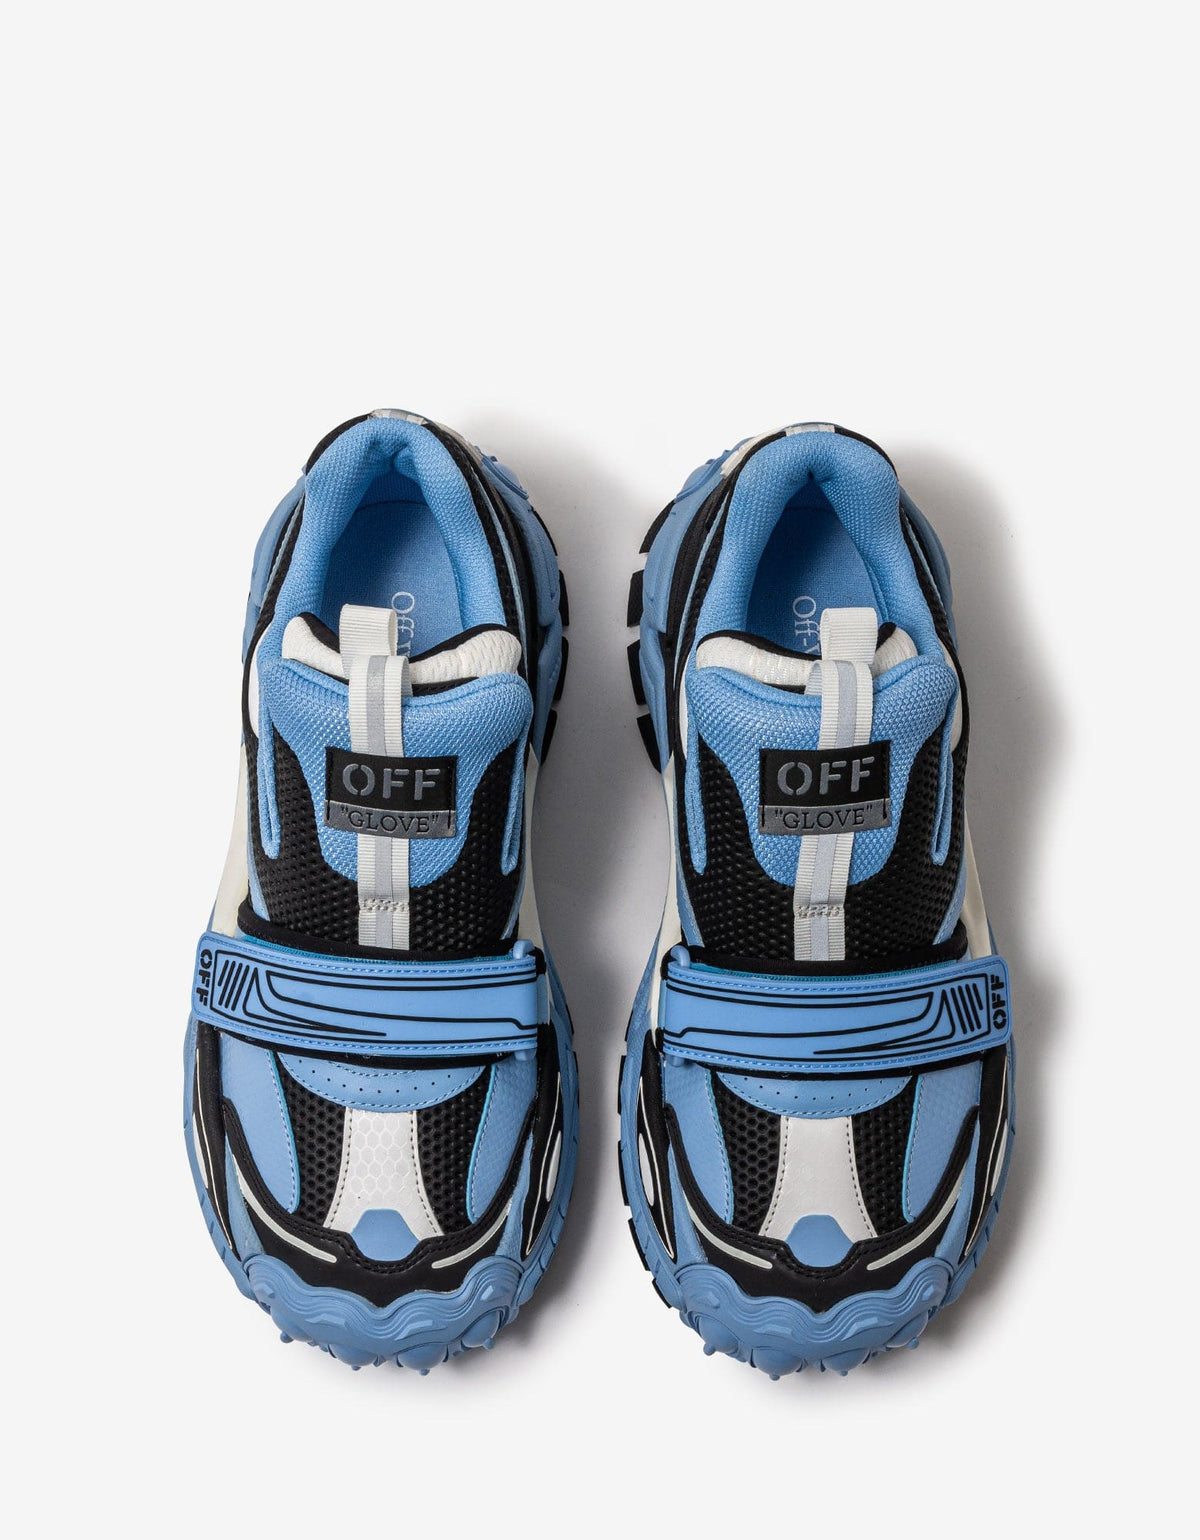 Off-White Off-White Glove Slip-On Blue Trainers